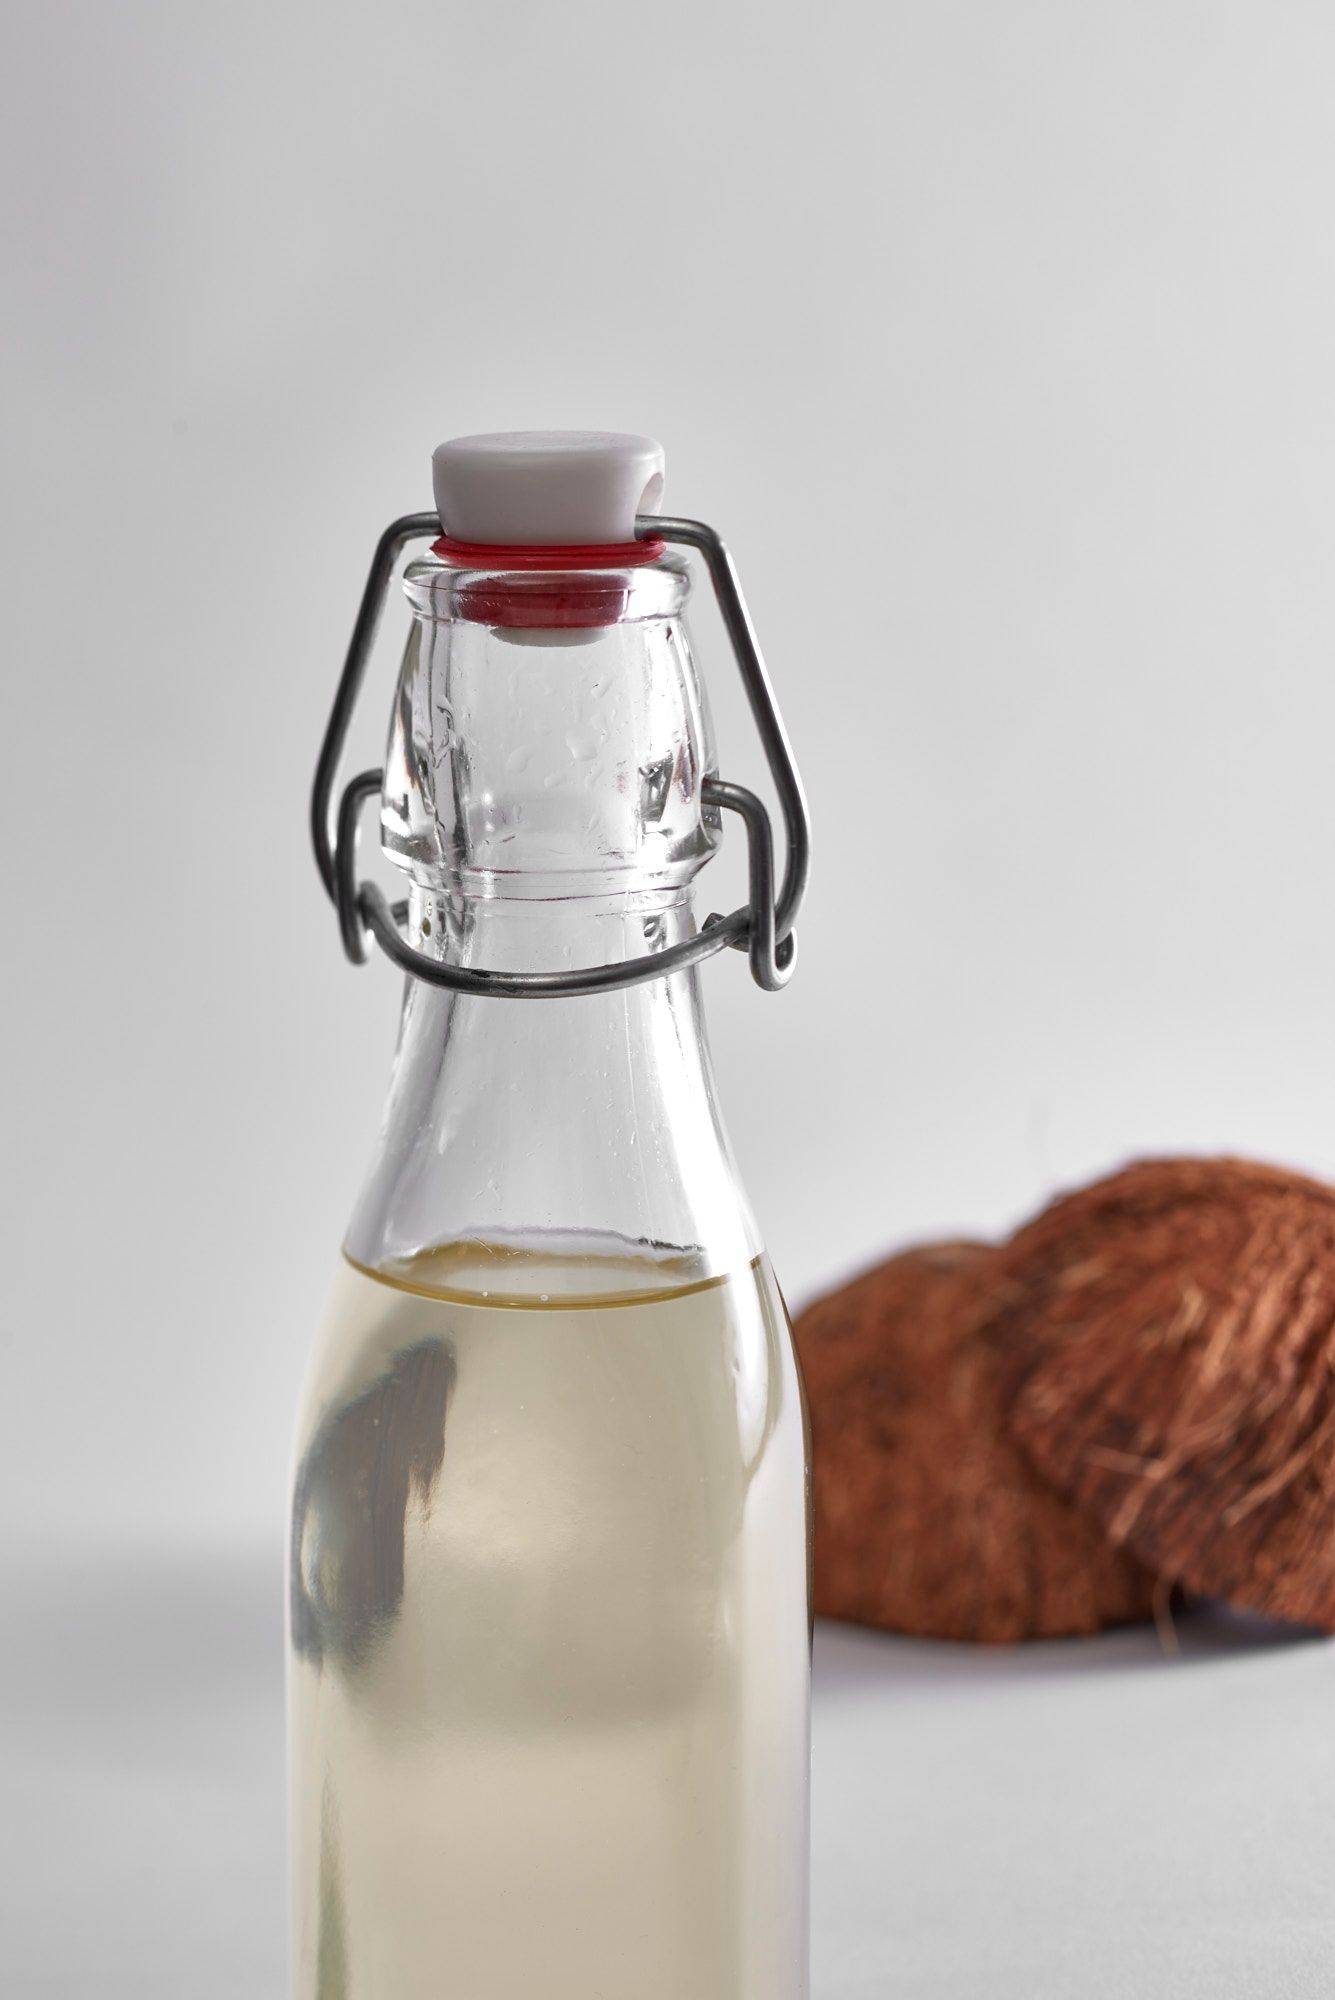 coconut syrup in a glass bottle on white background